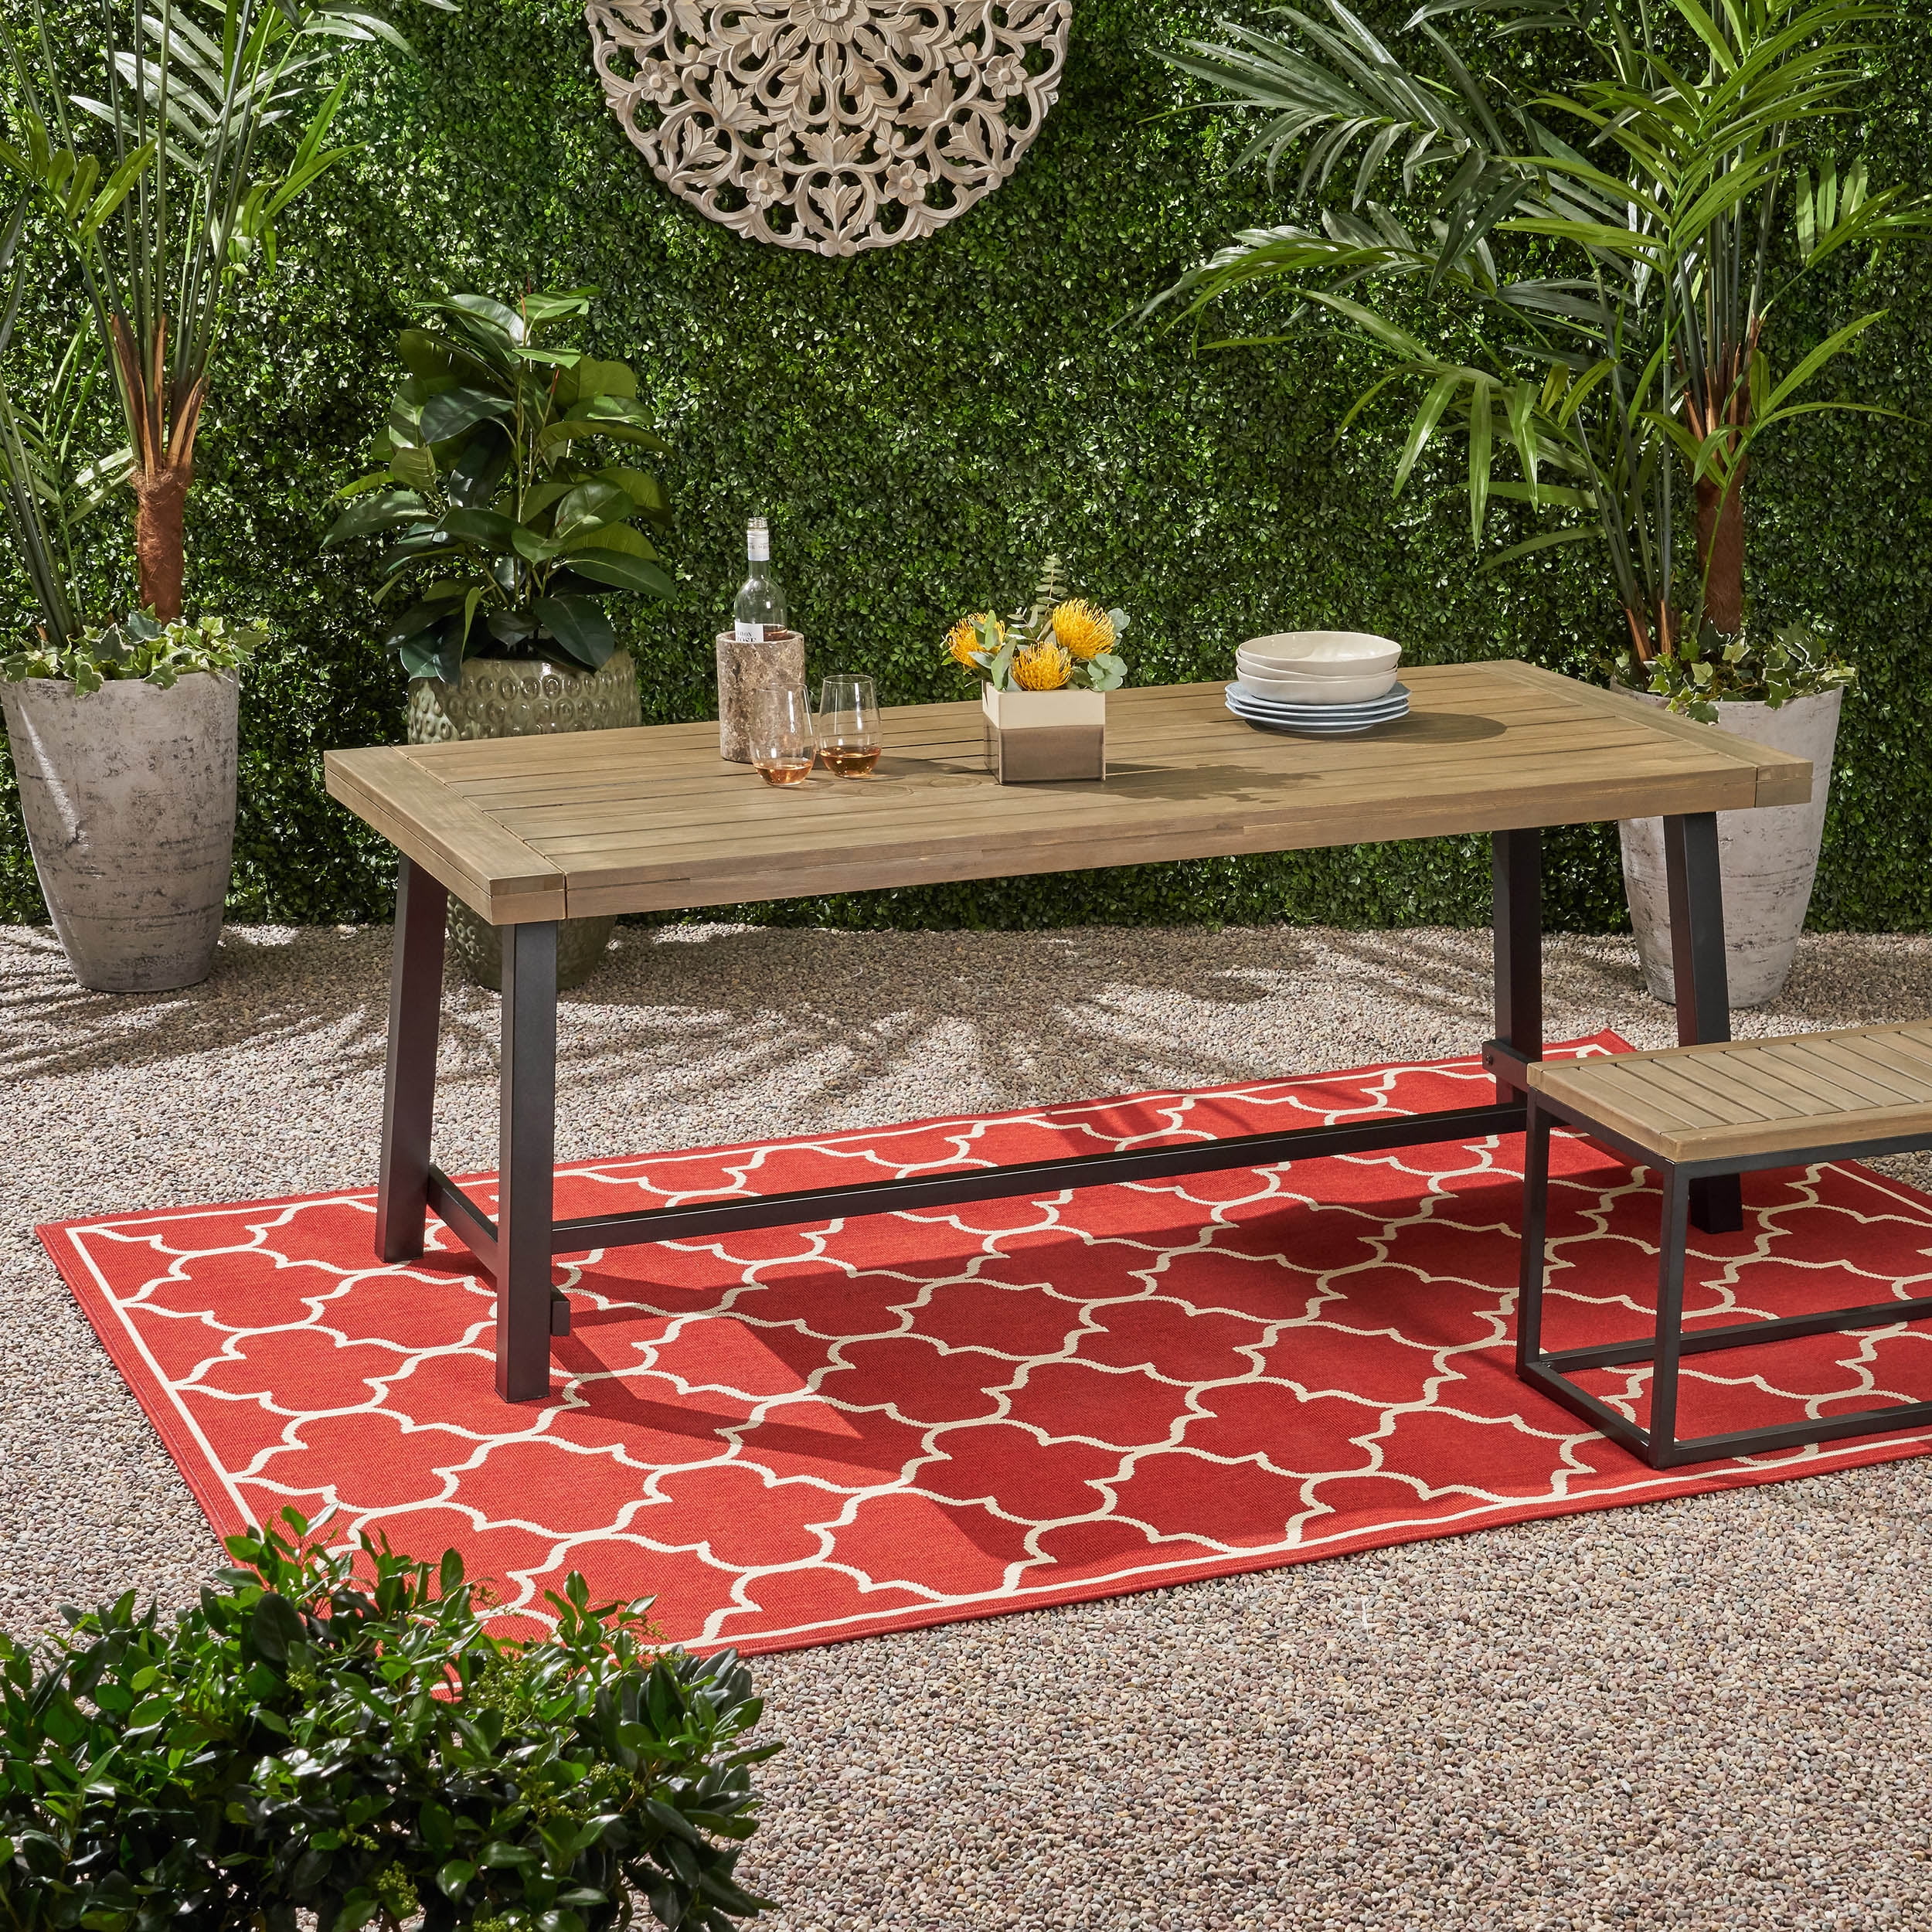 Kamden Outdoor Eight Seater Wooden Dining Table, Gray and Black